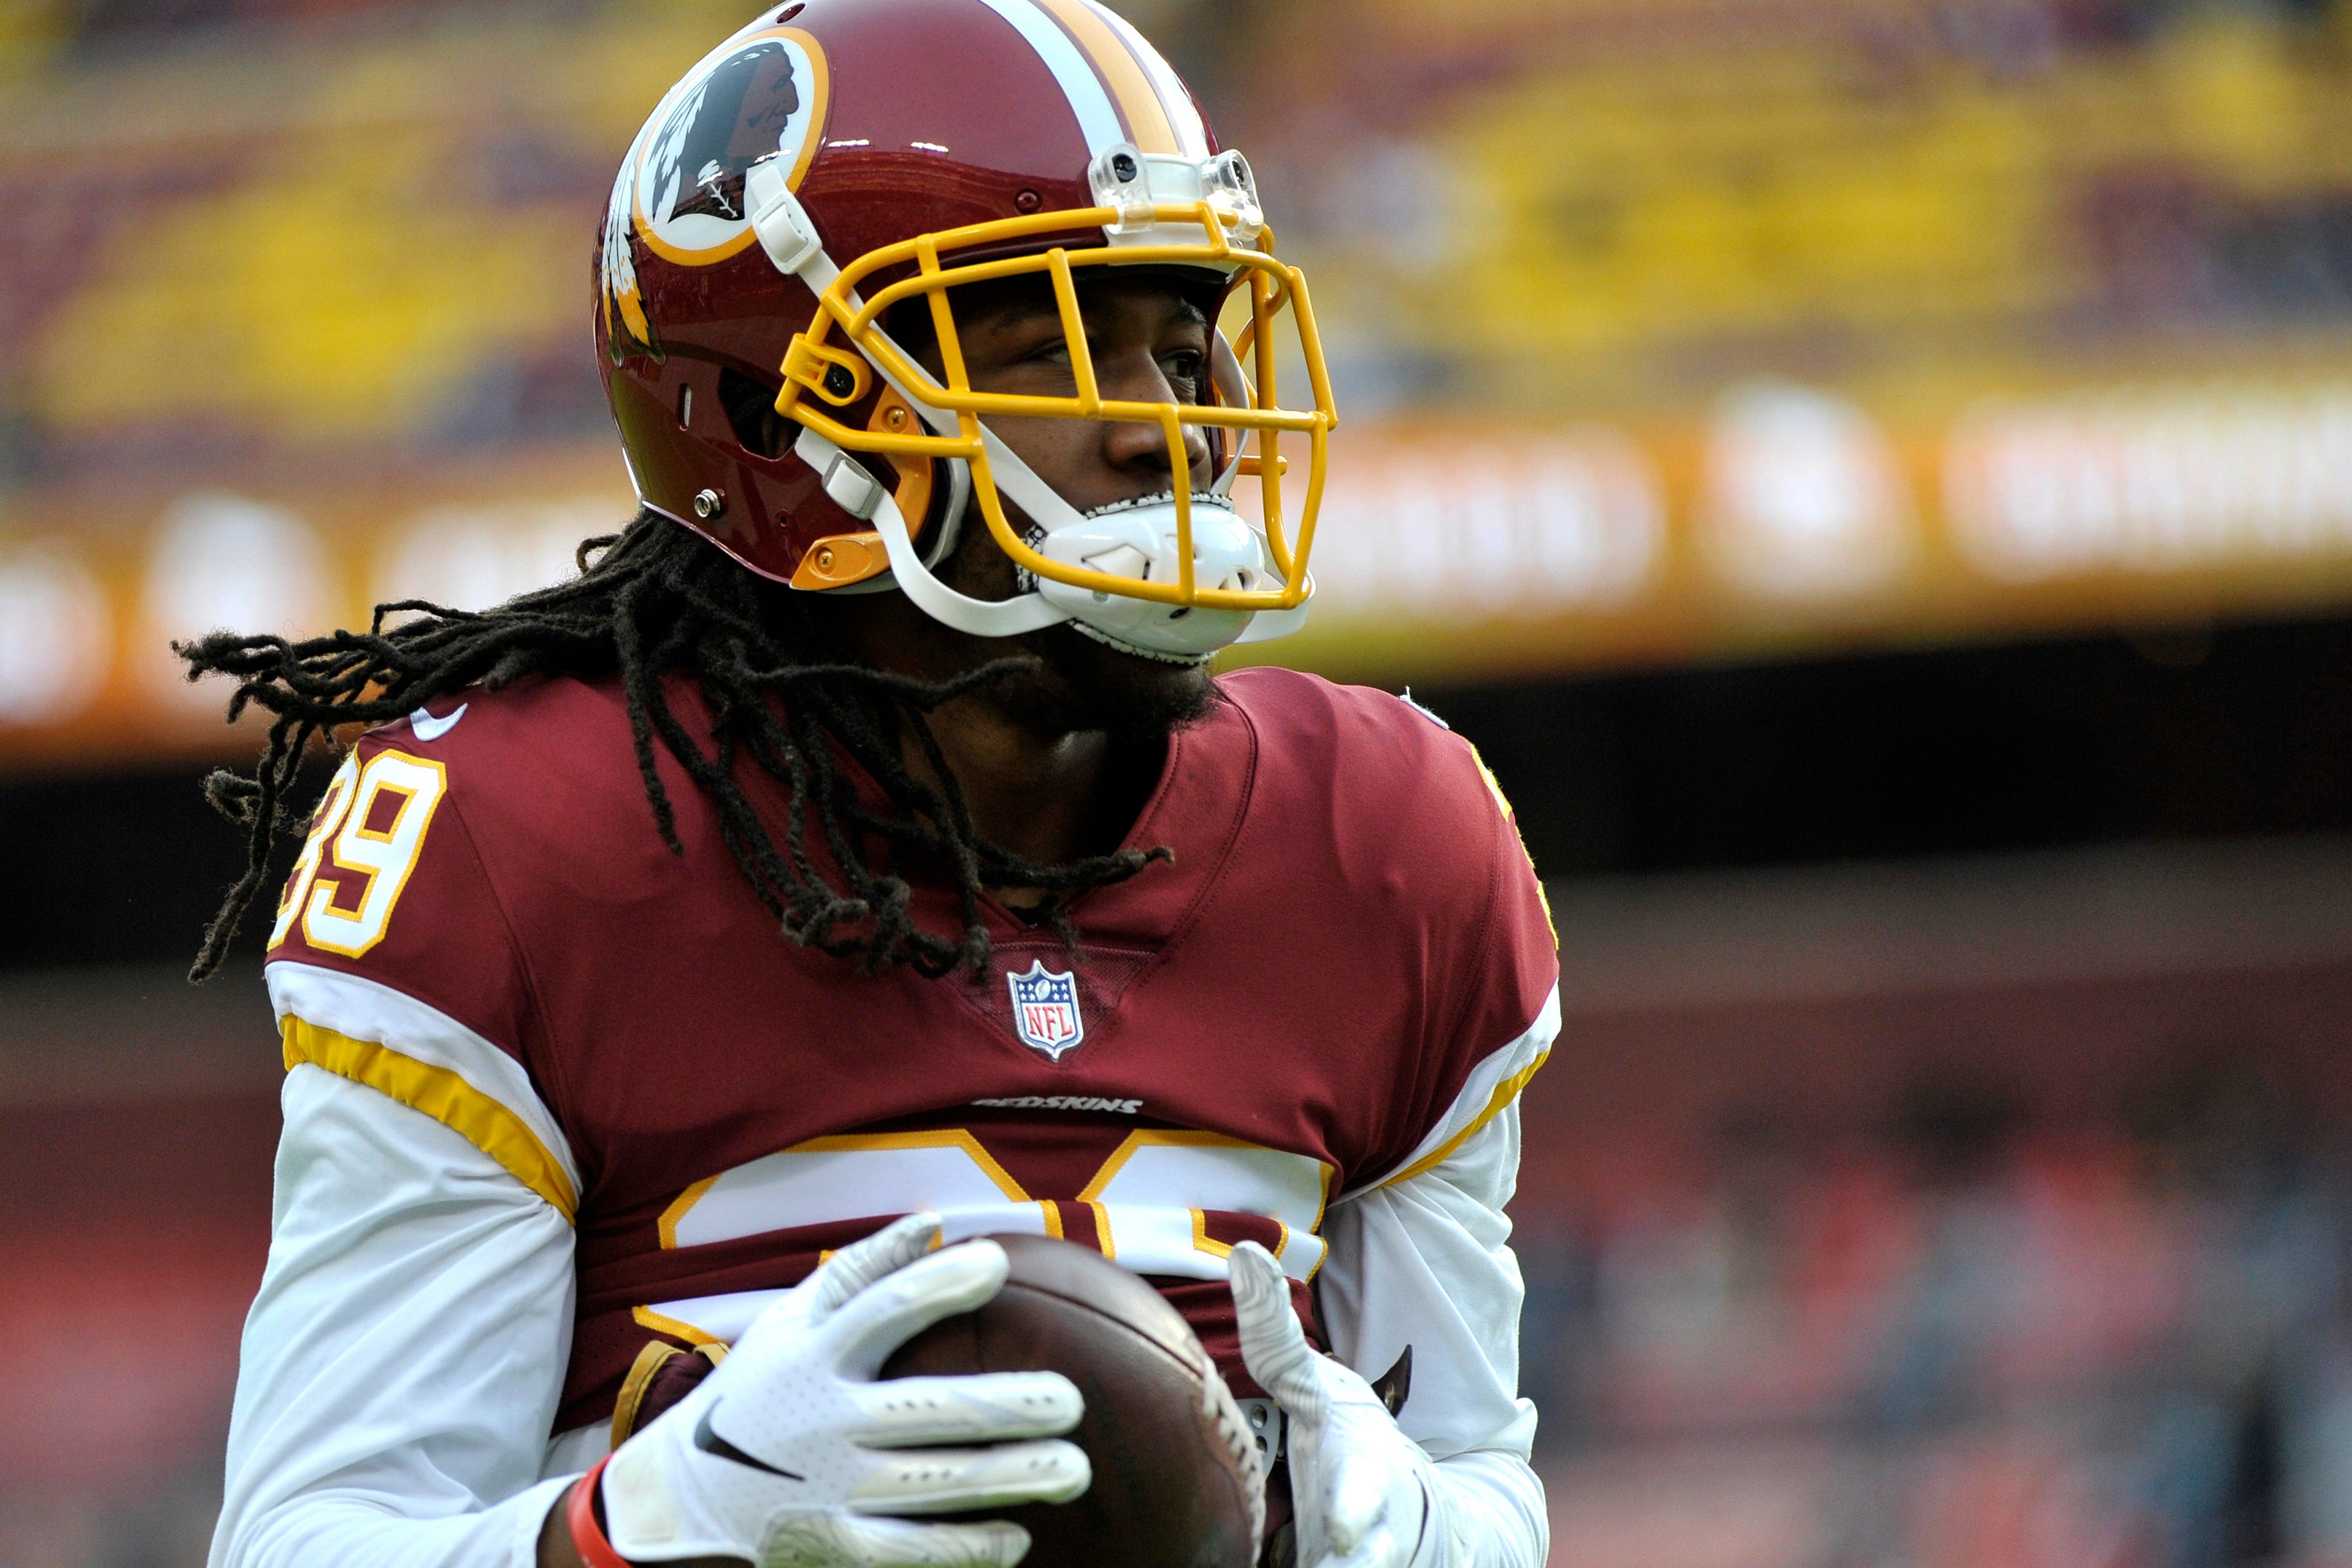 Redskins' Alexander sees specialist, out 2 weeks with injury